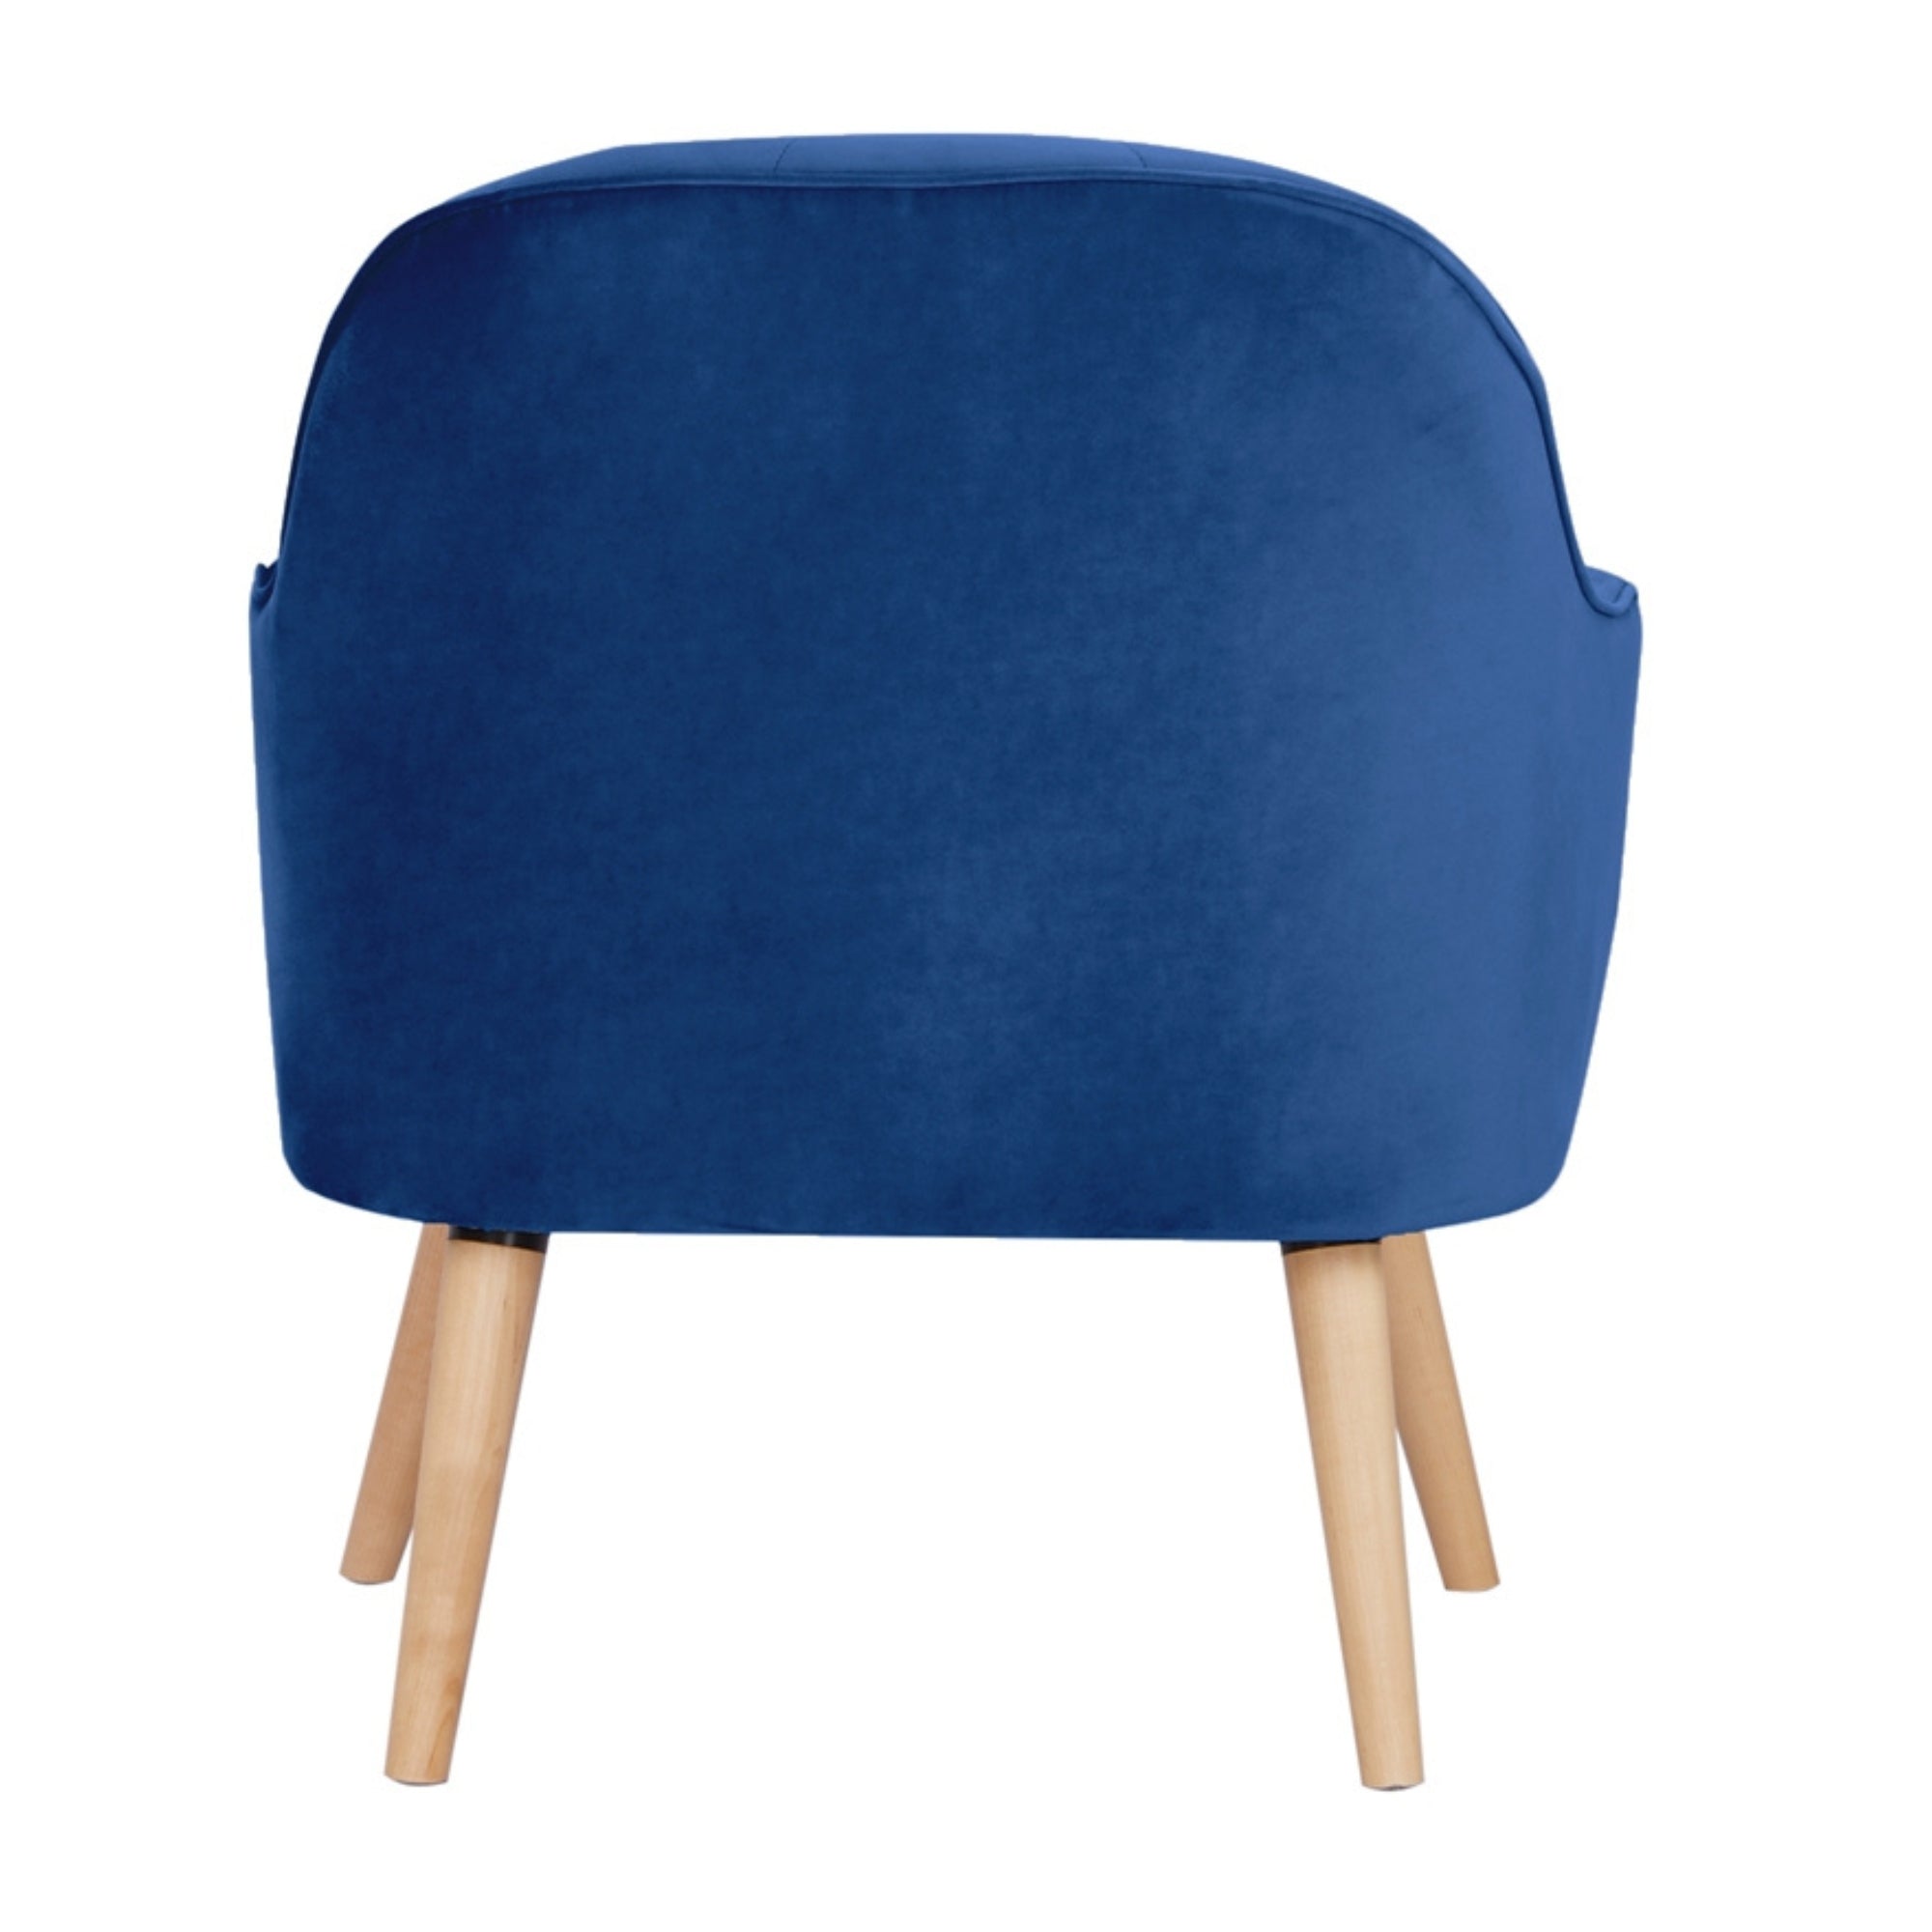 Dark Blue Upholstered Accent Arm Chair, Wooden Legs, Keira